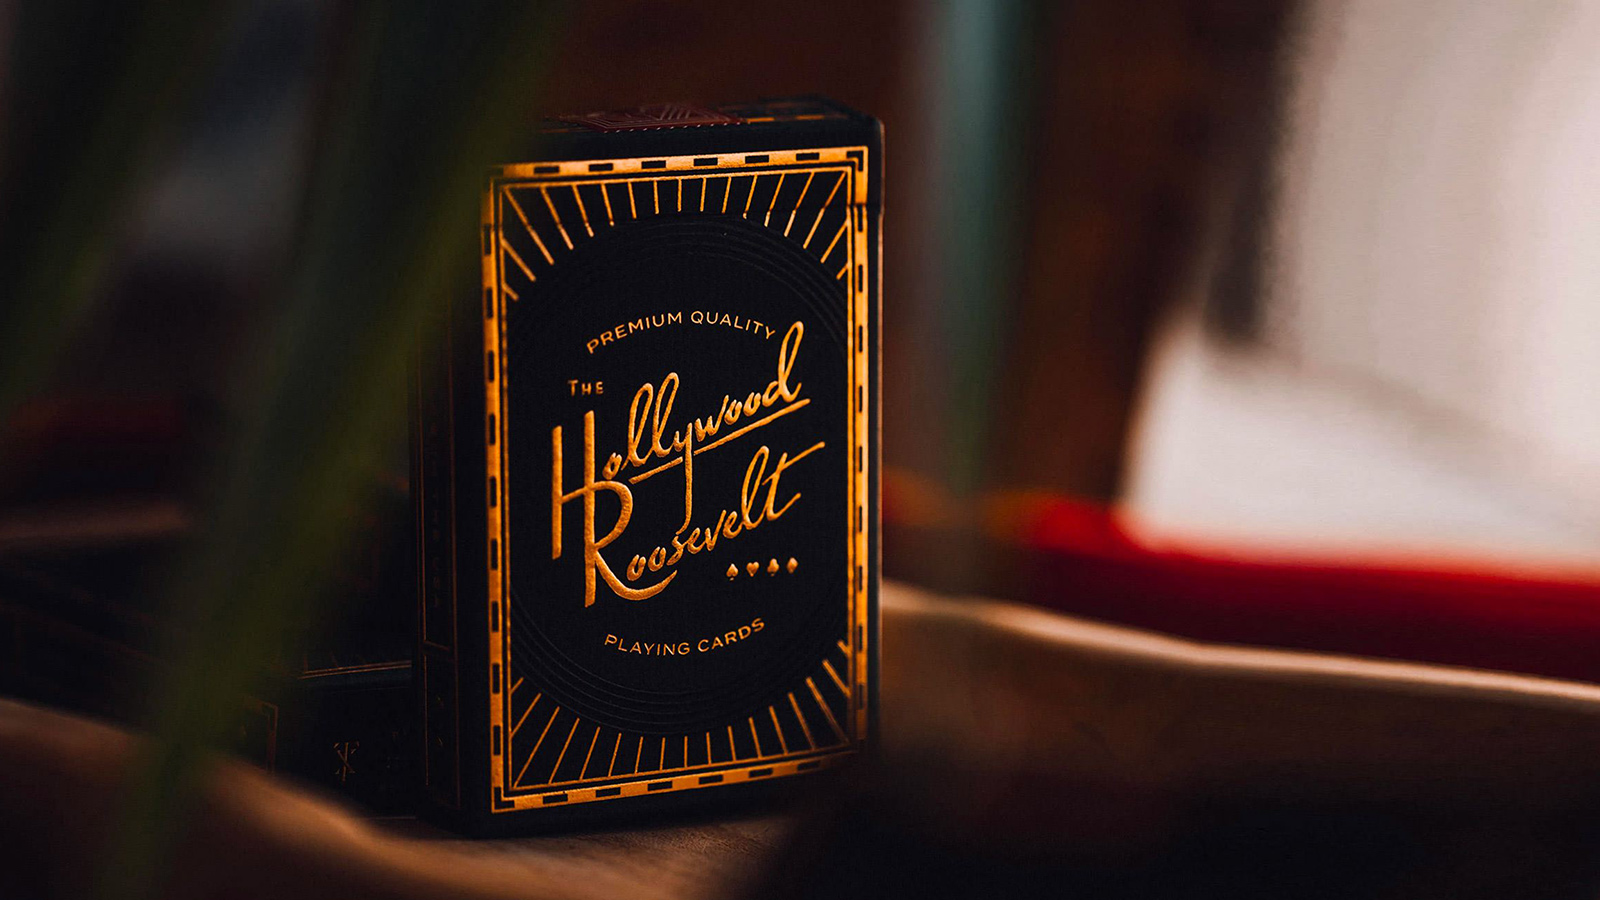 theory11 Hollywood Roosevelt Playing Cards